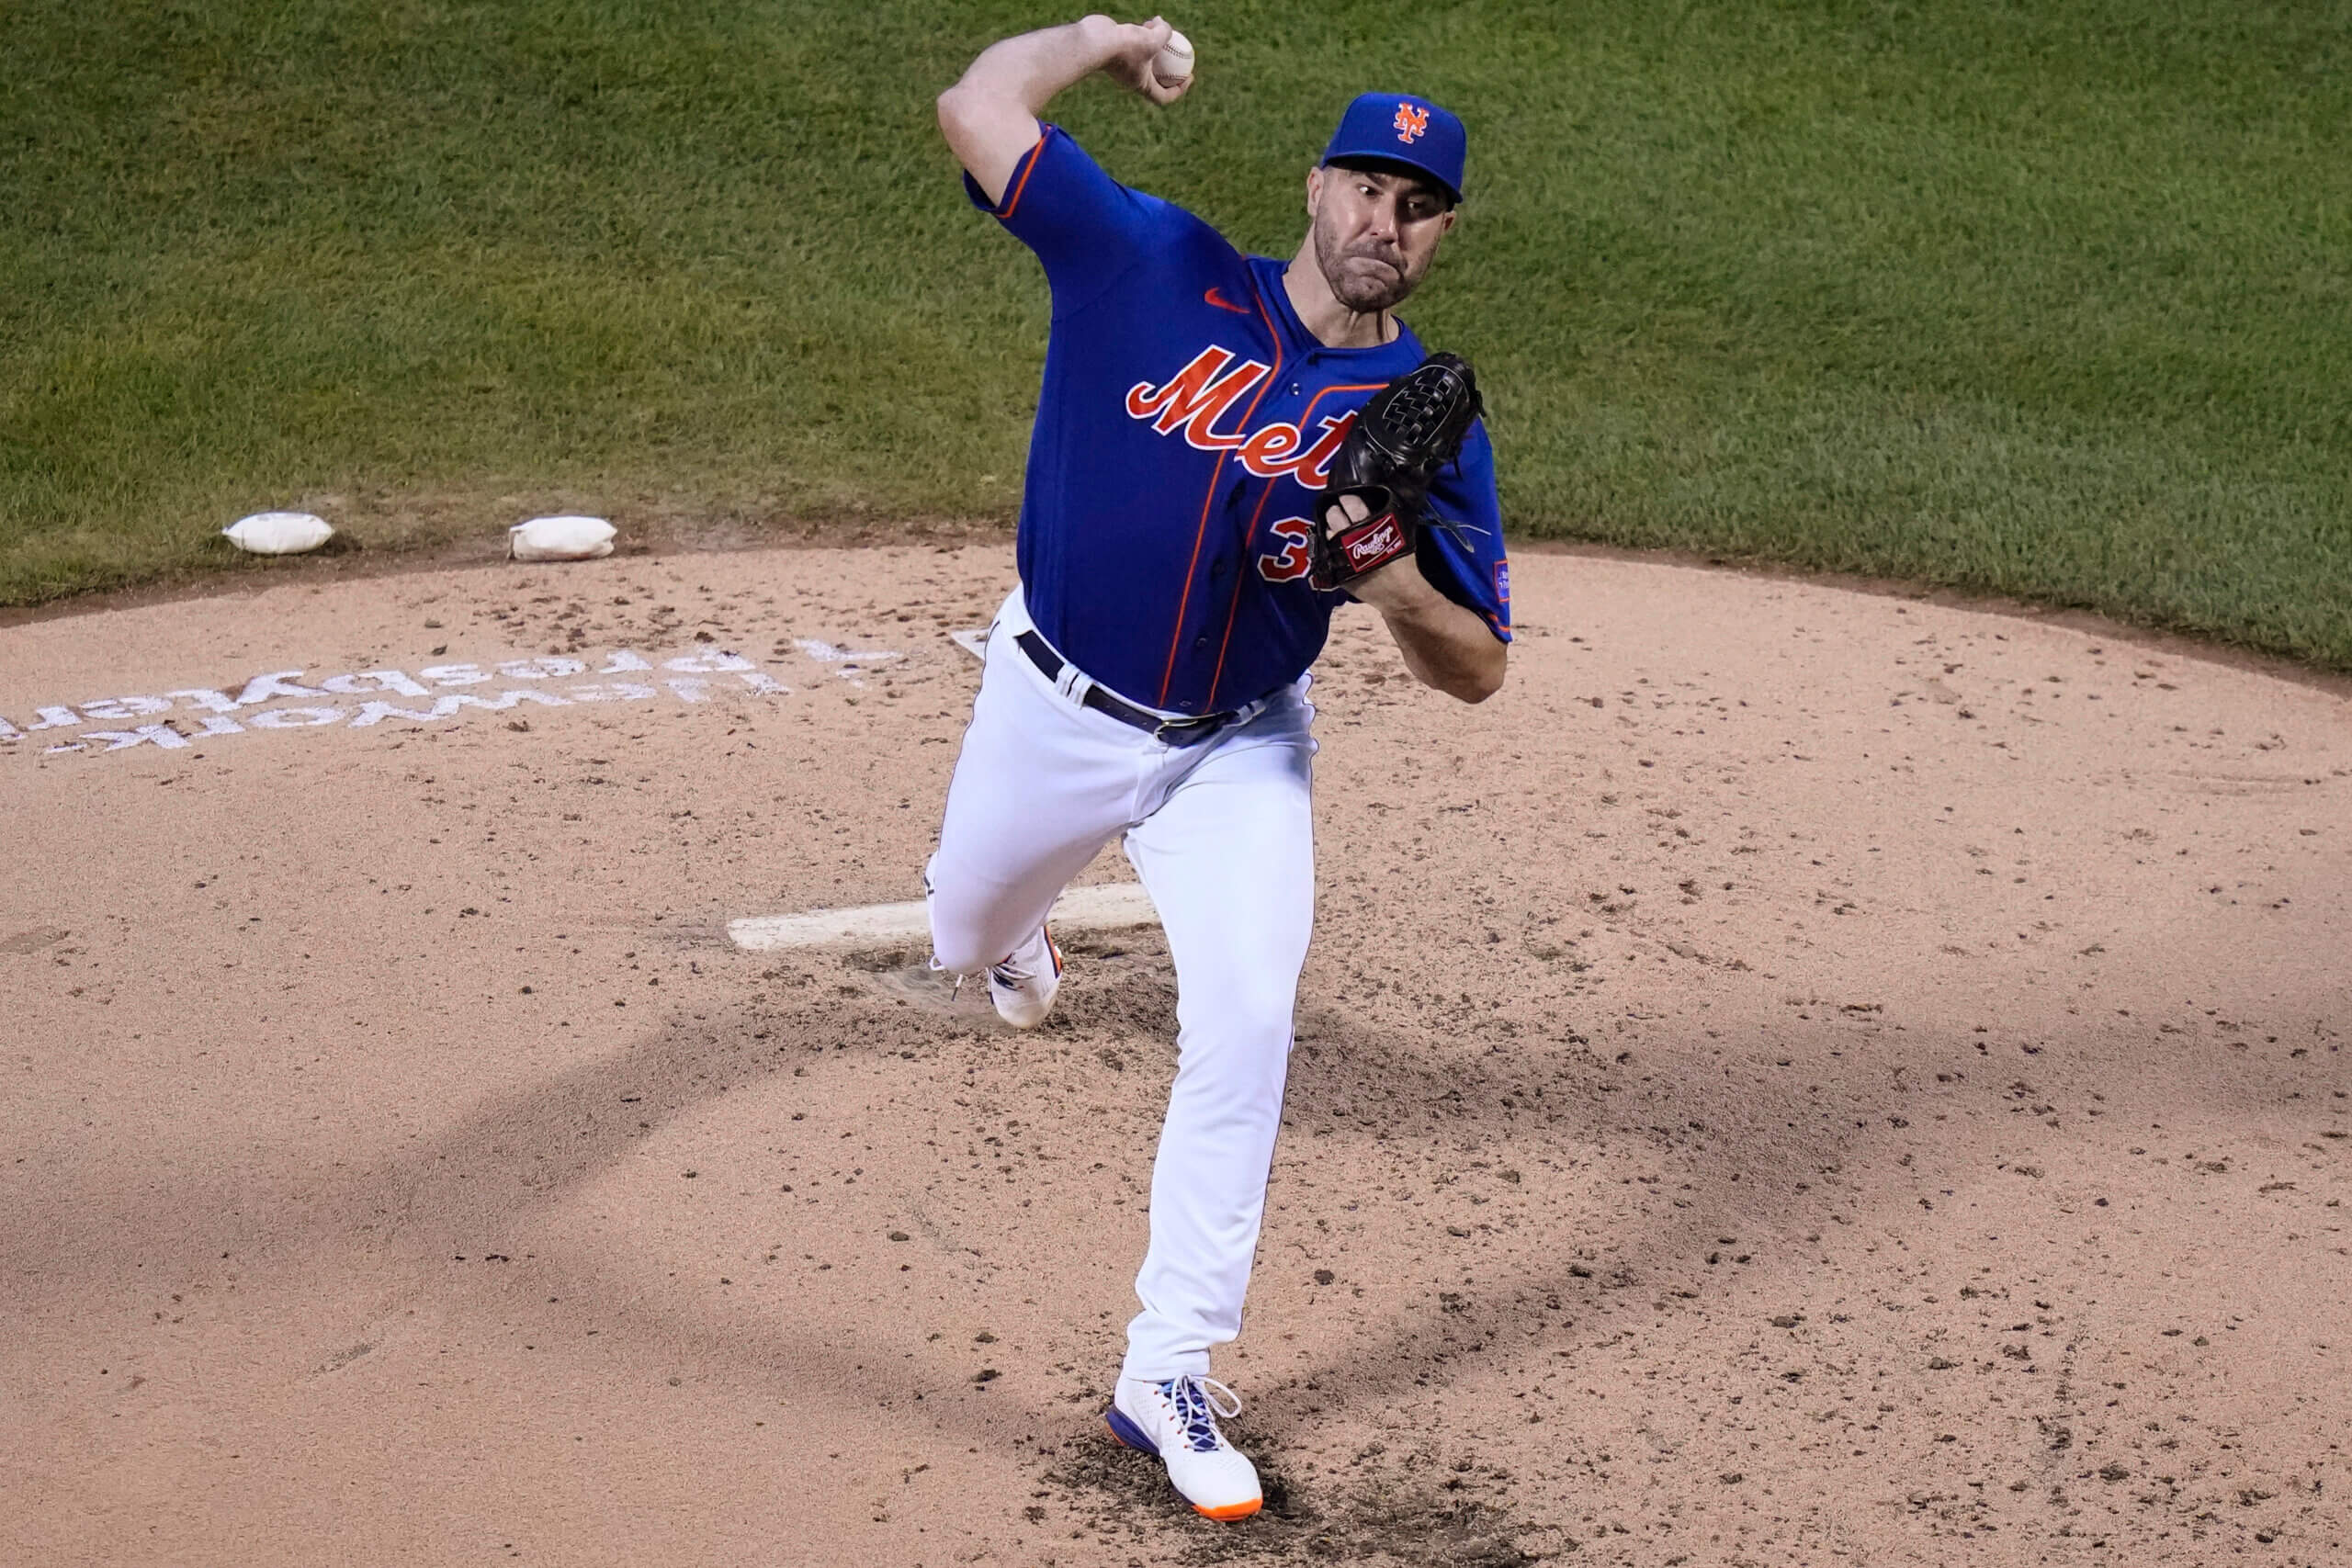 Alonso has a big night and Verlander pitches the Mets past the